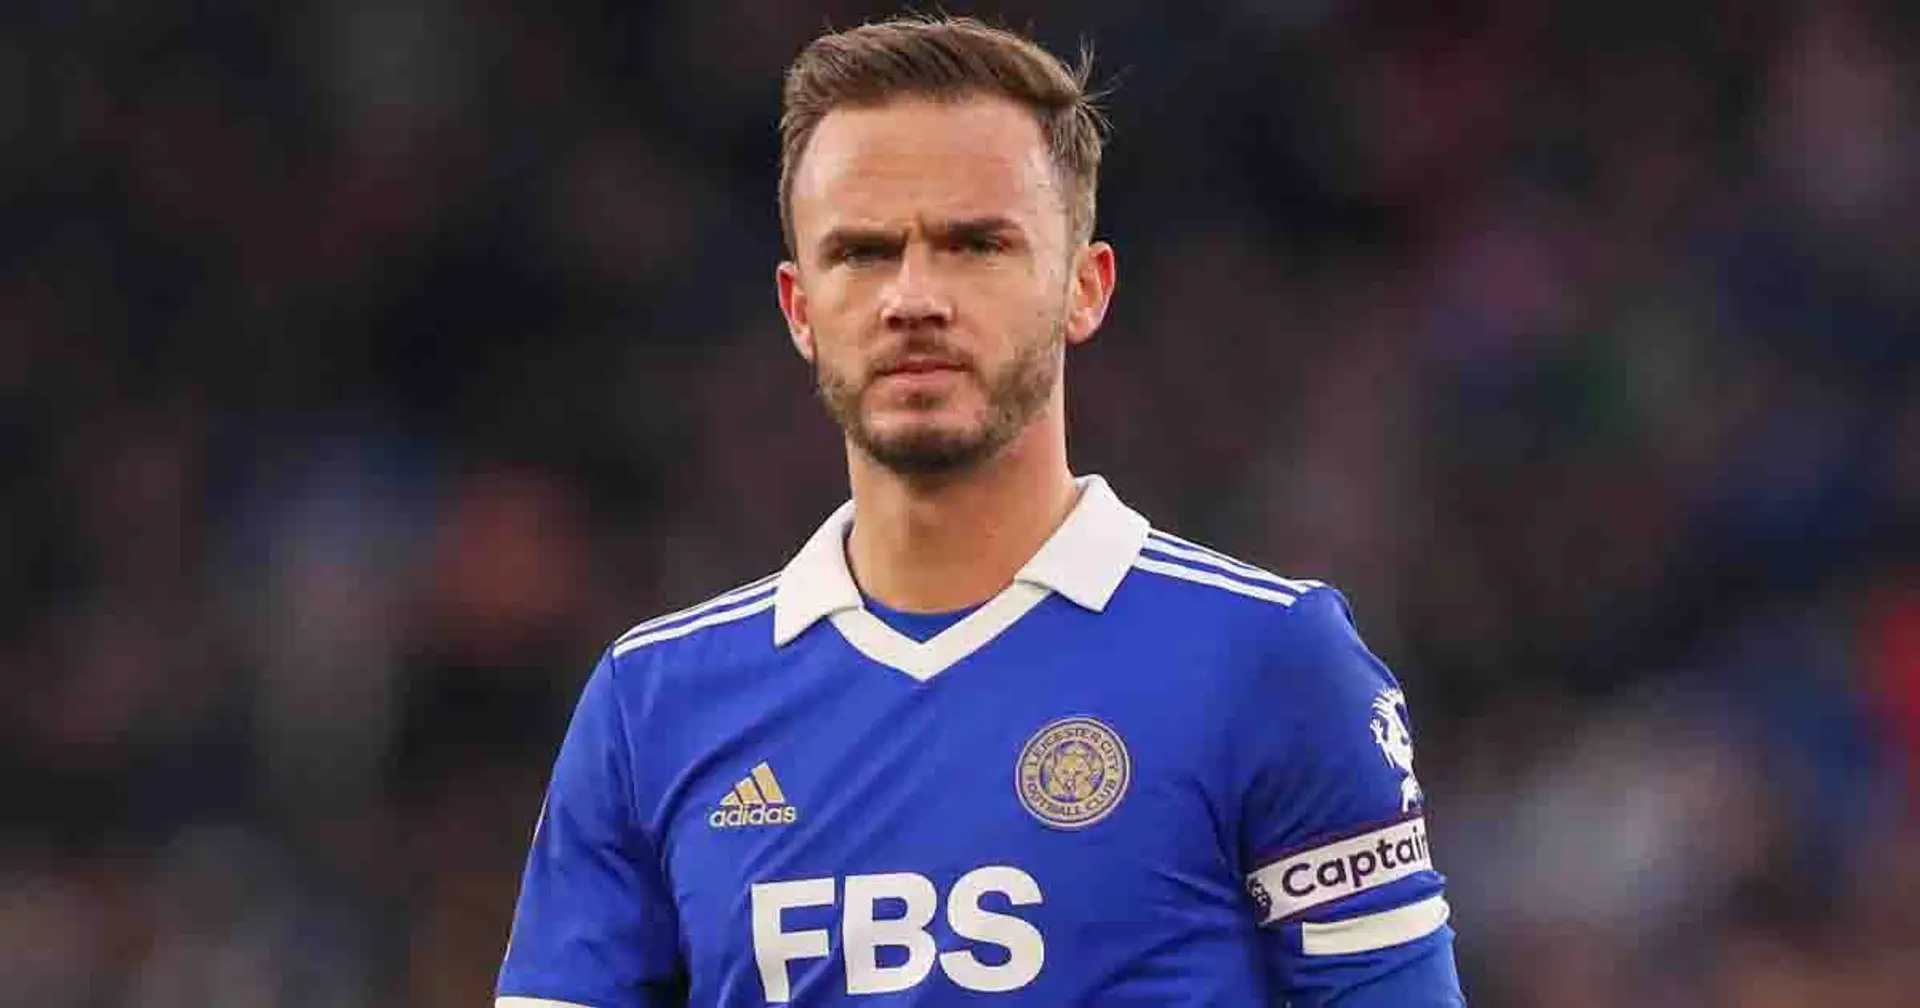 Chelsea's stance on signing James Maddison revealed (reliability: 5 stars)